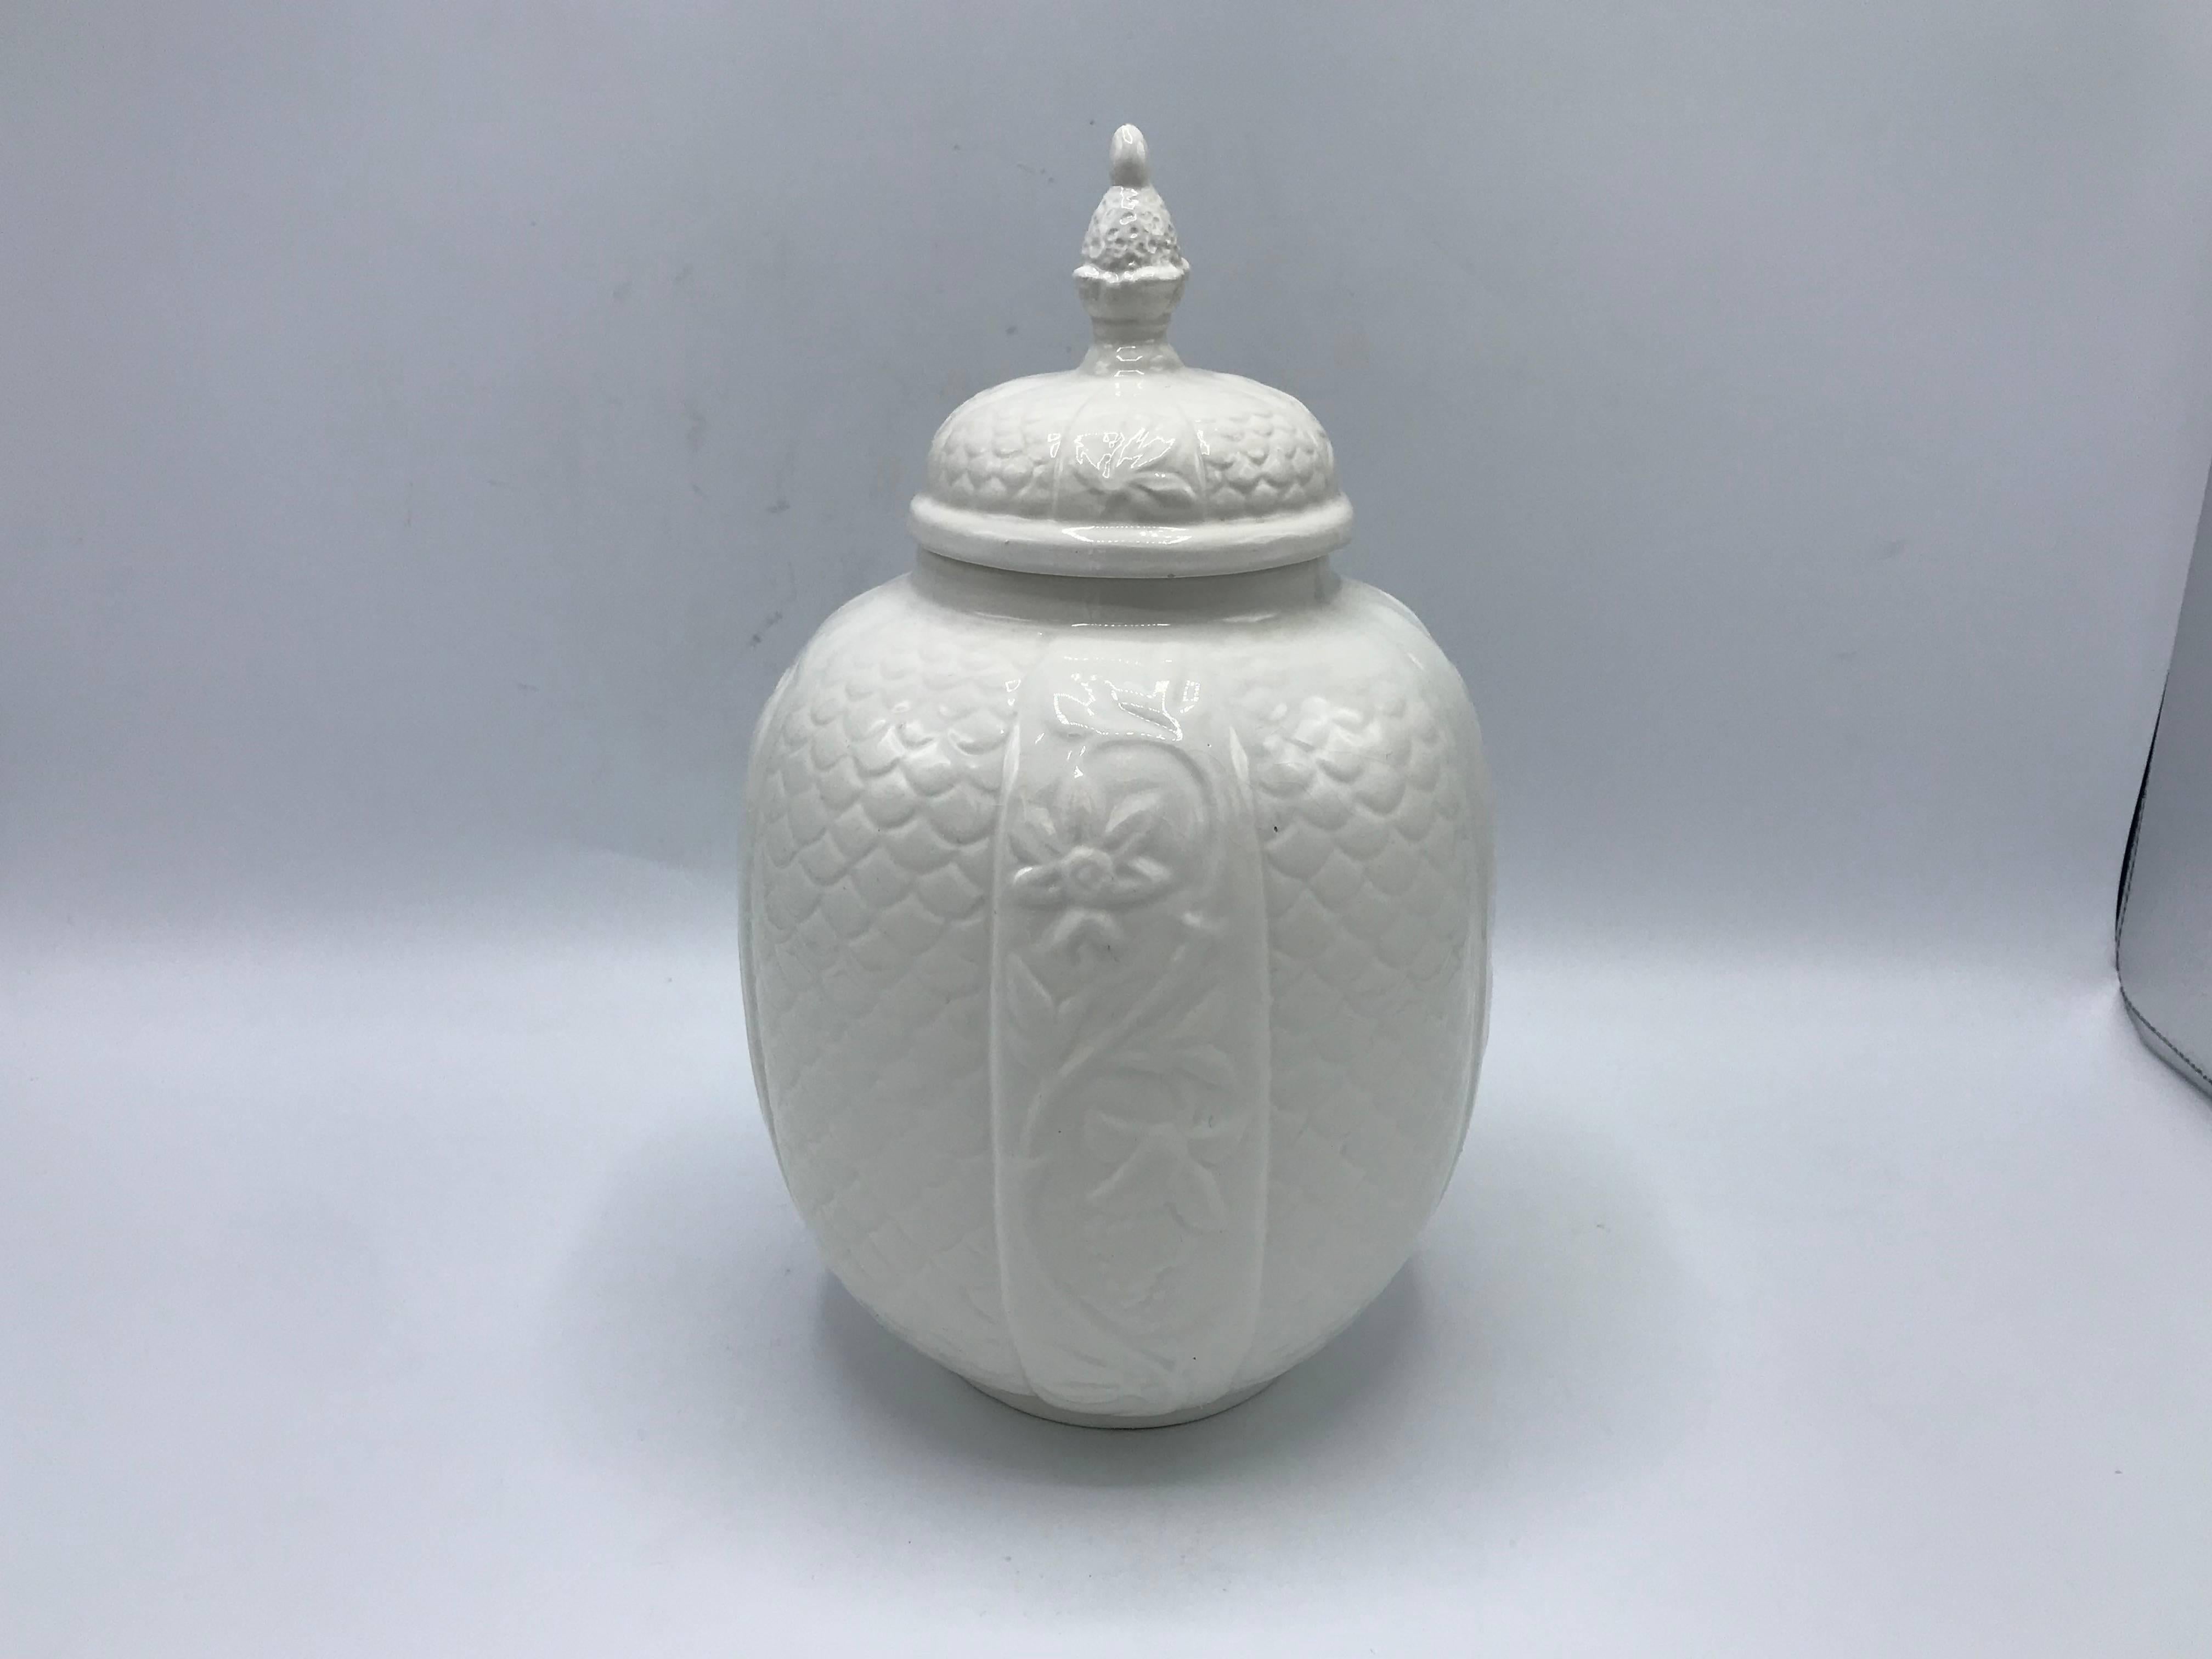 Offered is an exquisite, 1960s Italian white glazed-ceramic lidded jar or urn. The piece has a beautiful floral and scale motif, with a pineapple finial. Marked 